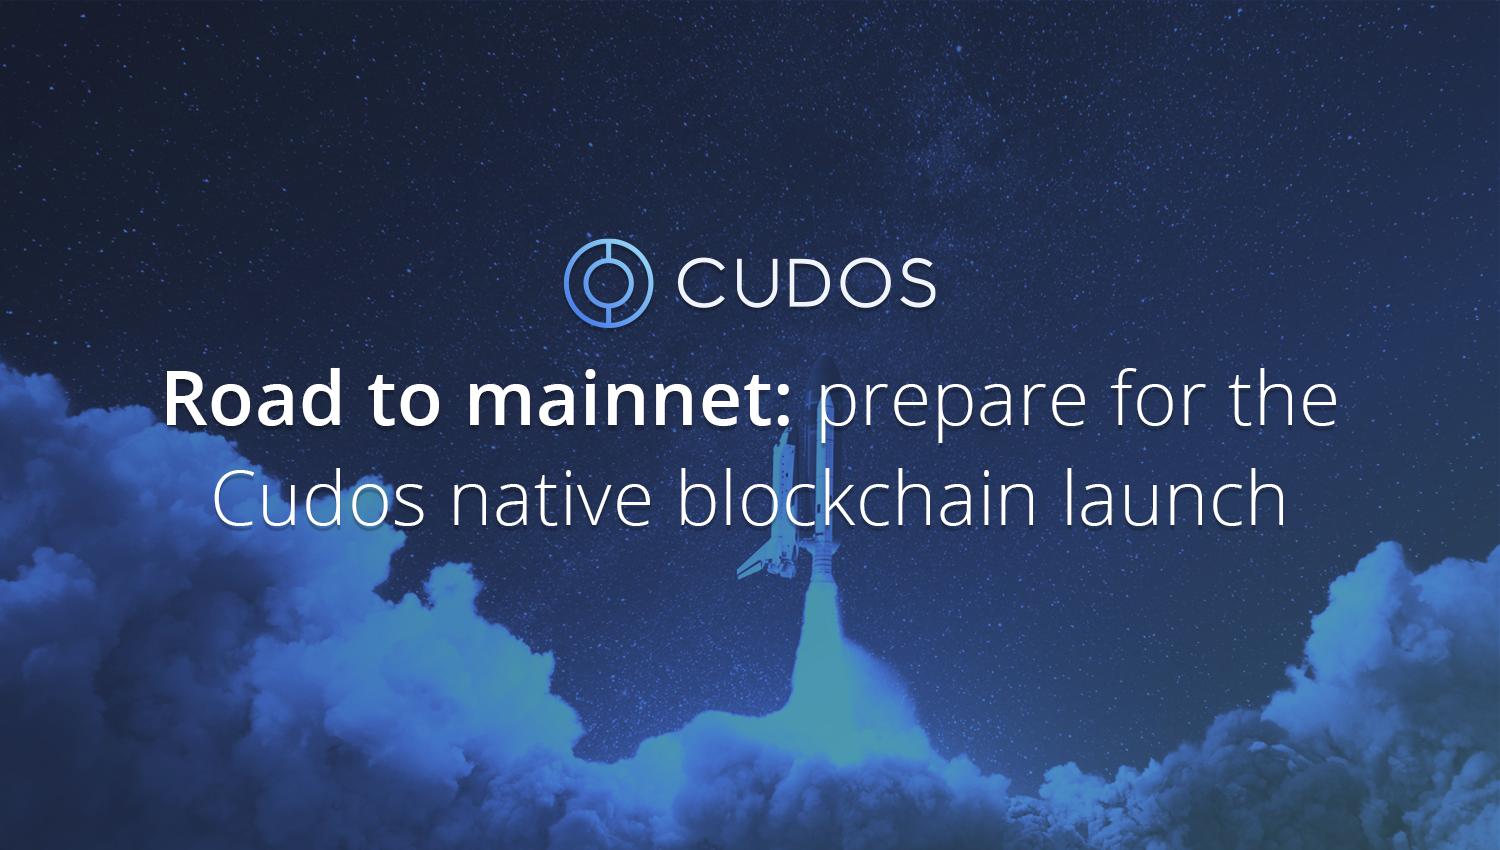 Road to mainnet – part 4: prepare for the Cudos native blockchain launch